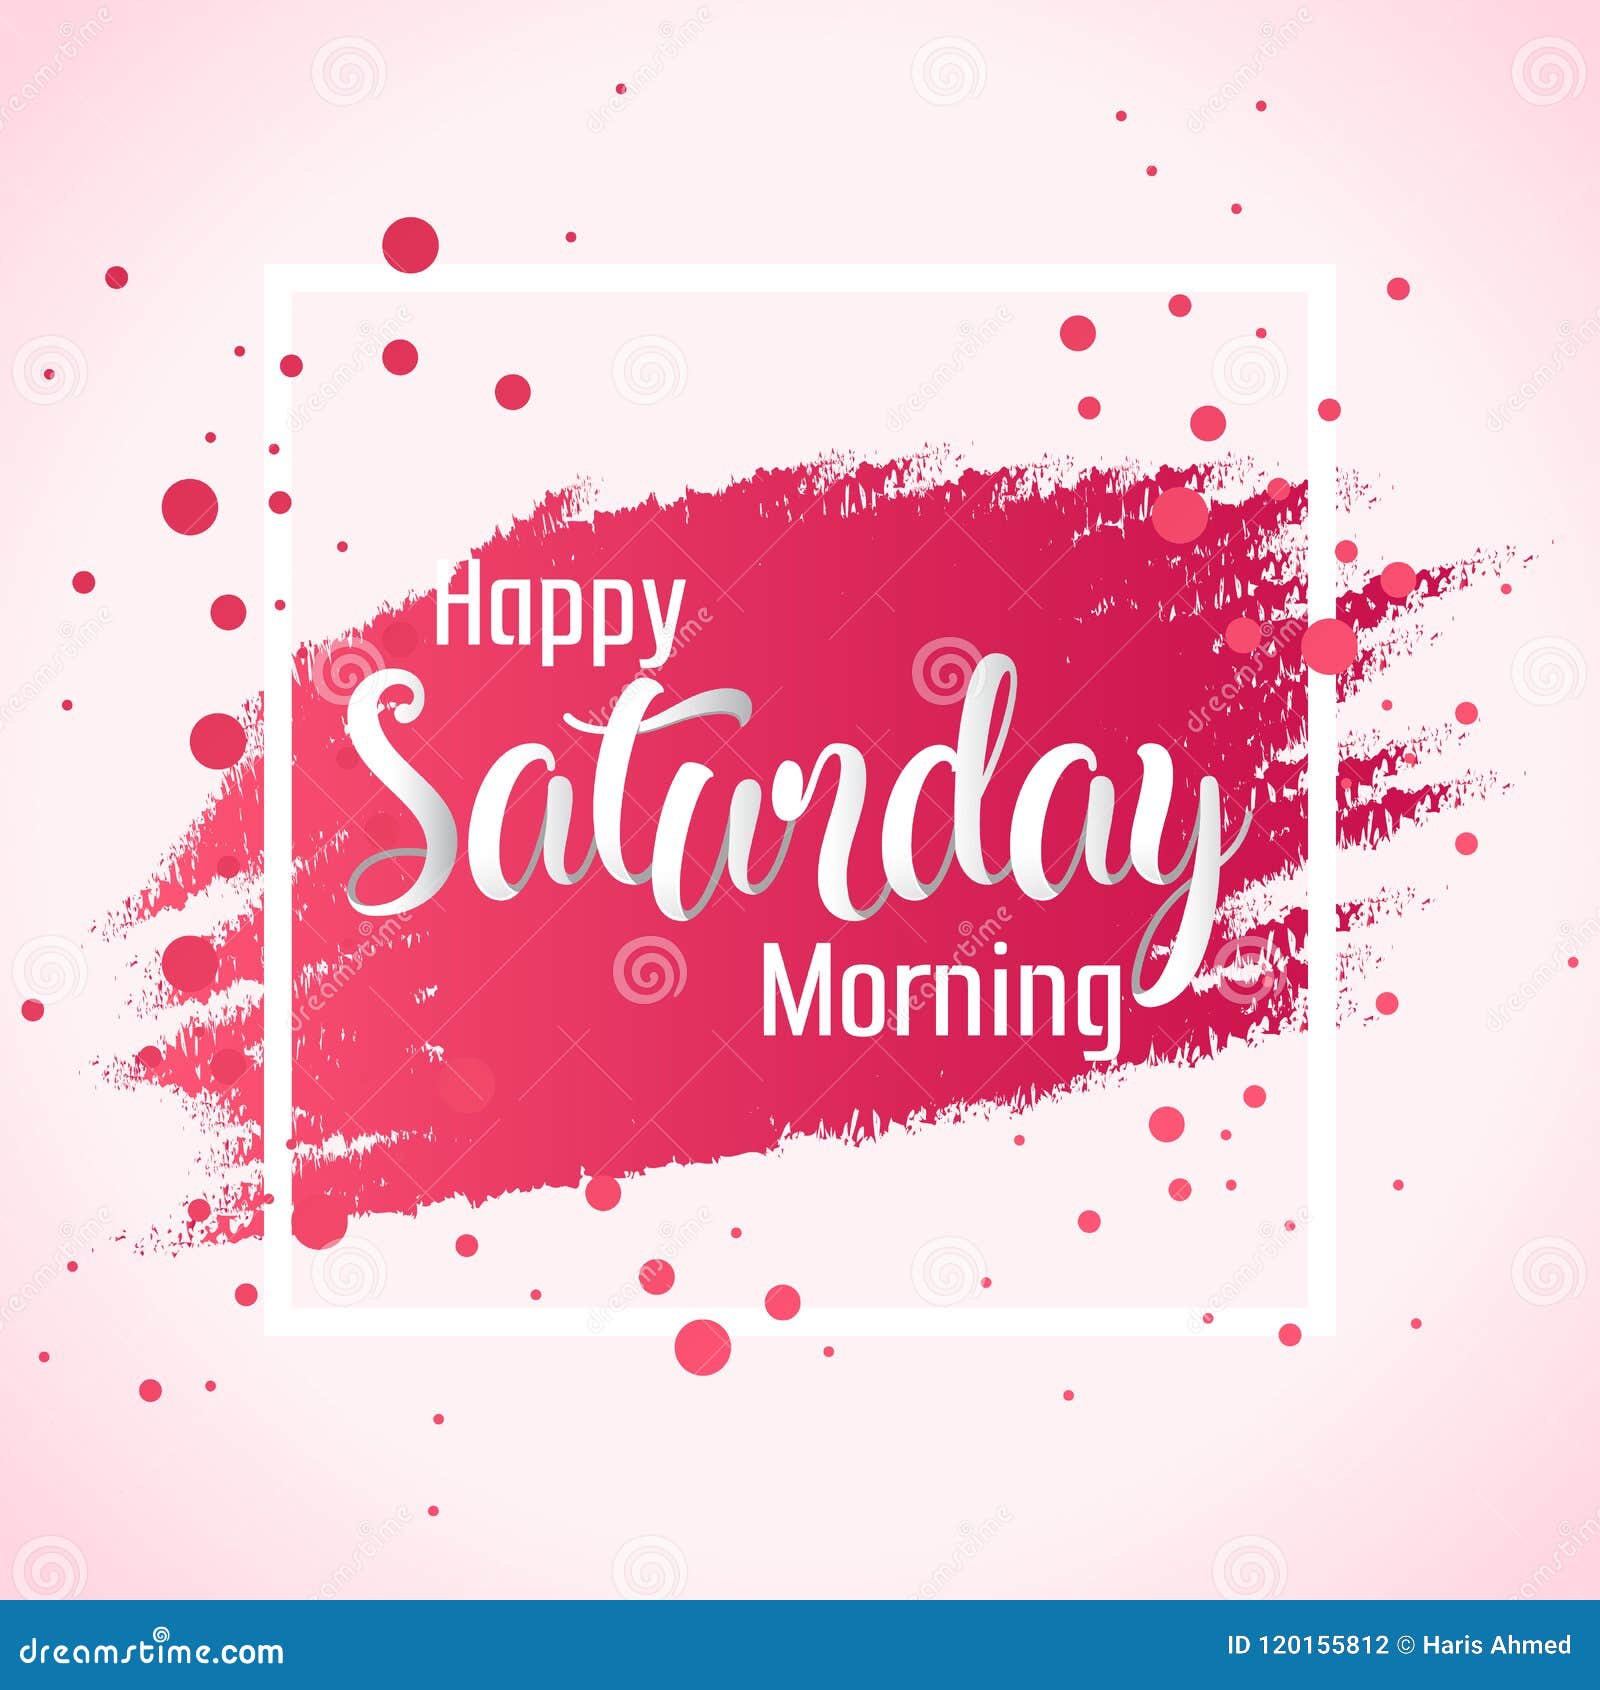 Abstract Happy Saturday Morning Background Illustration Vector ...